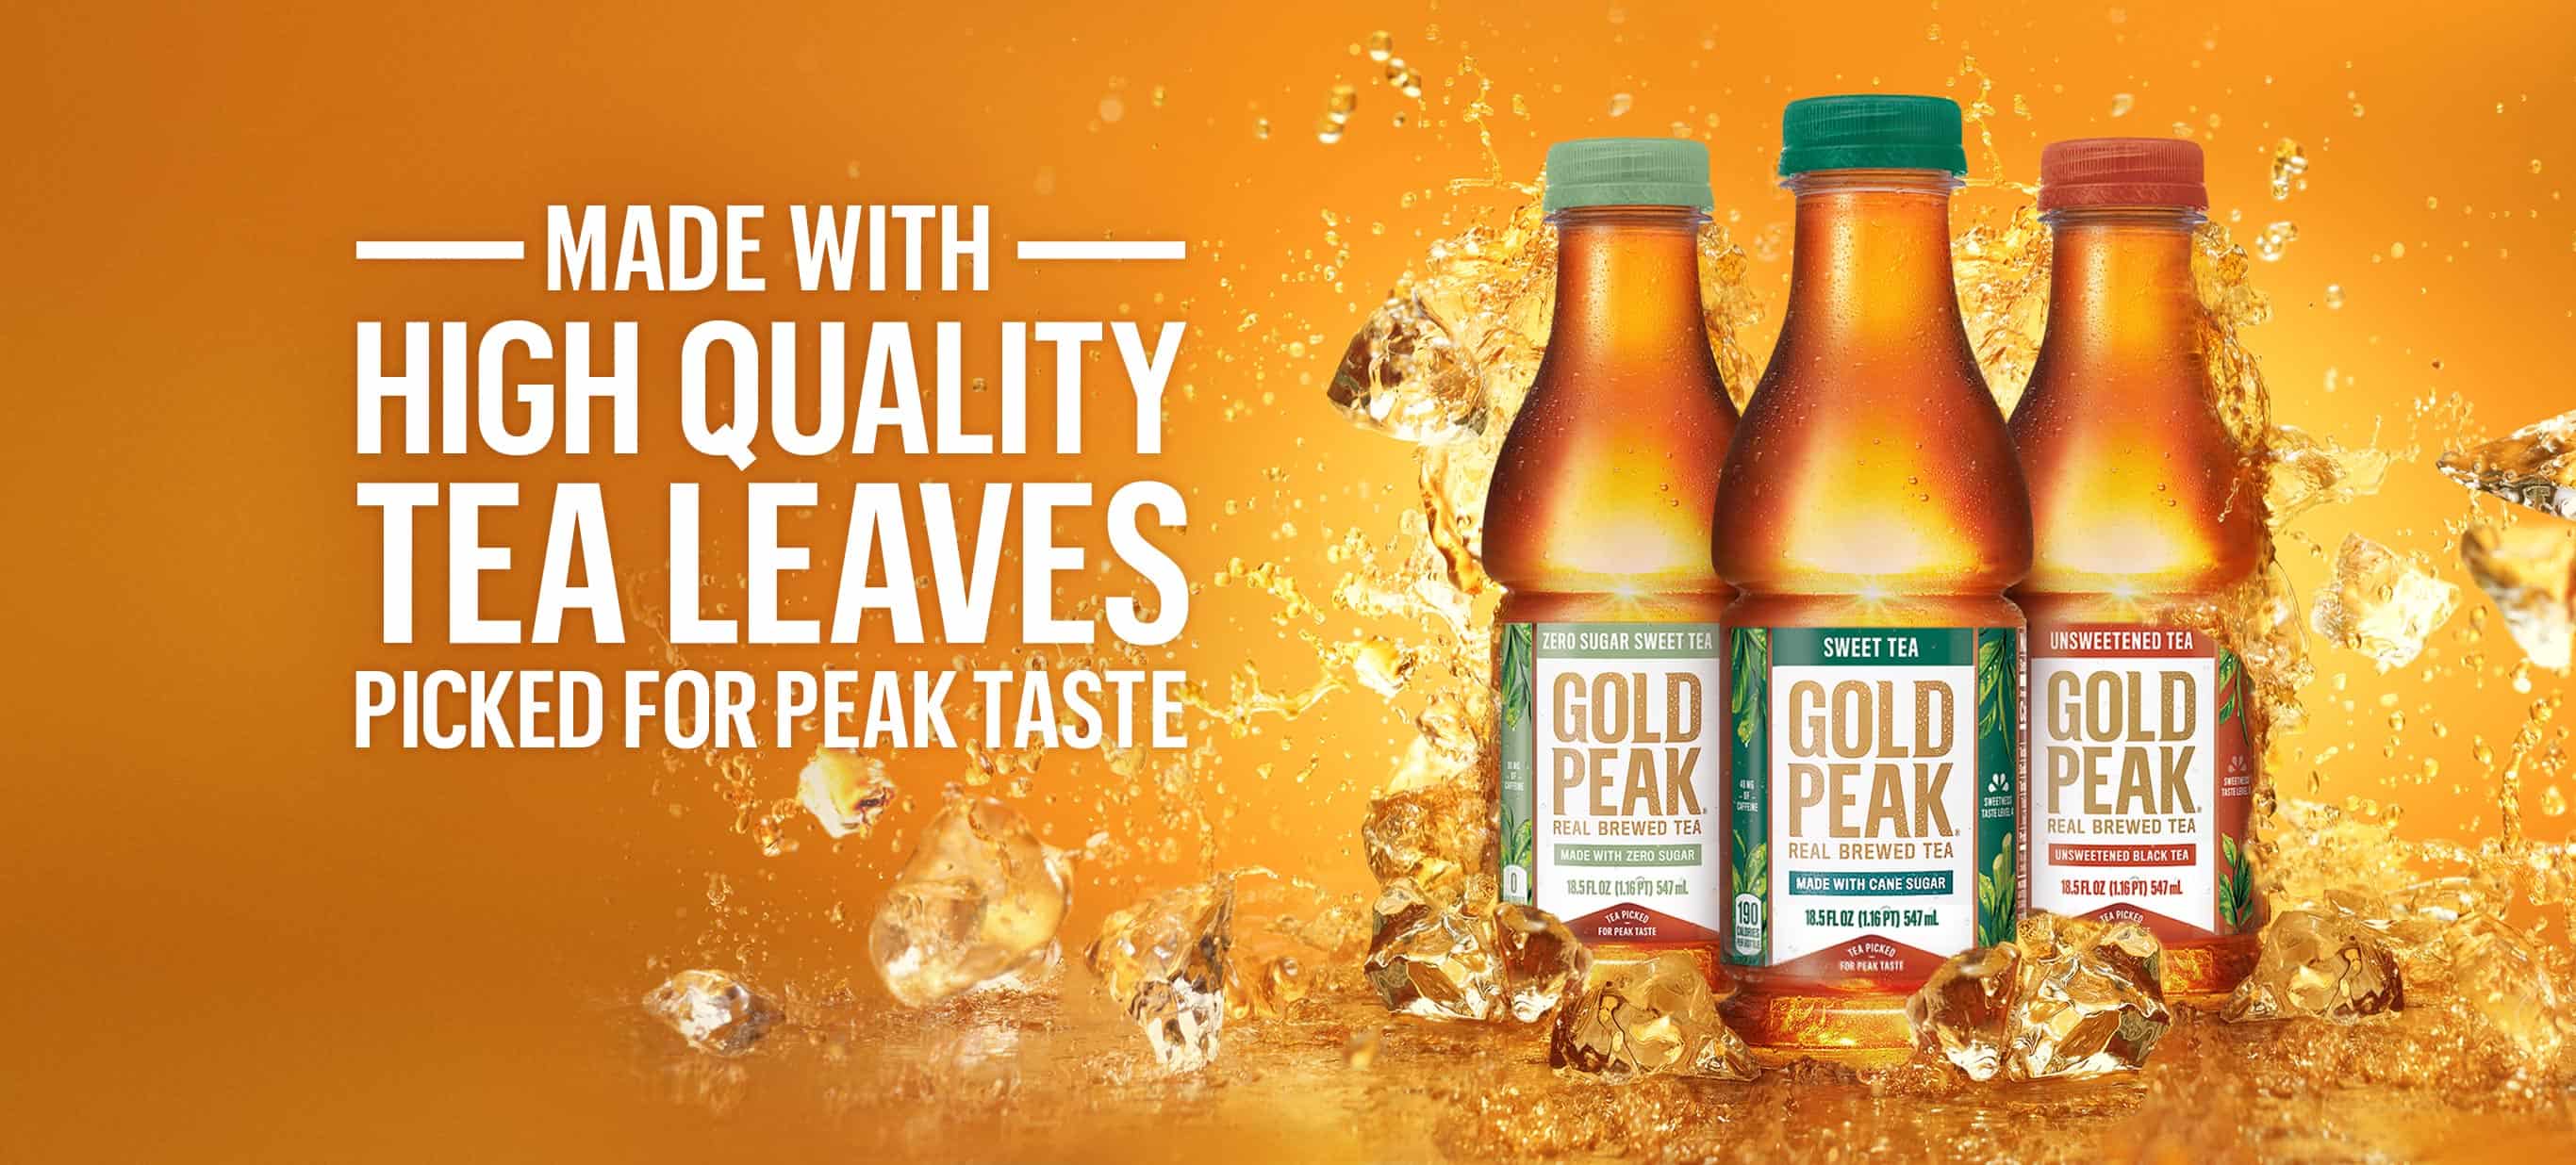 Three Gold Peak bottles in different flavors next to the slogan "Good taste is our thing"